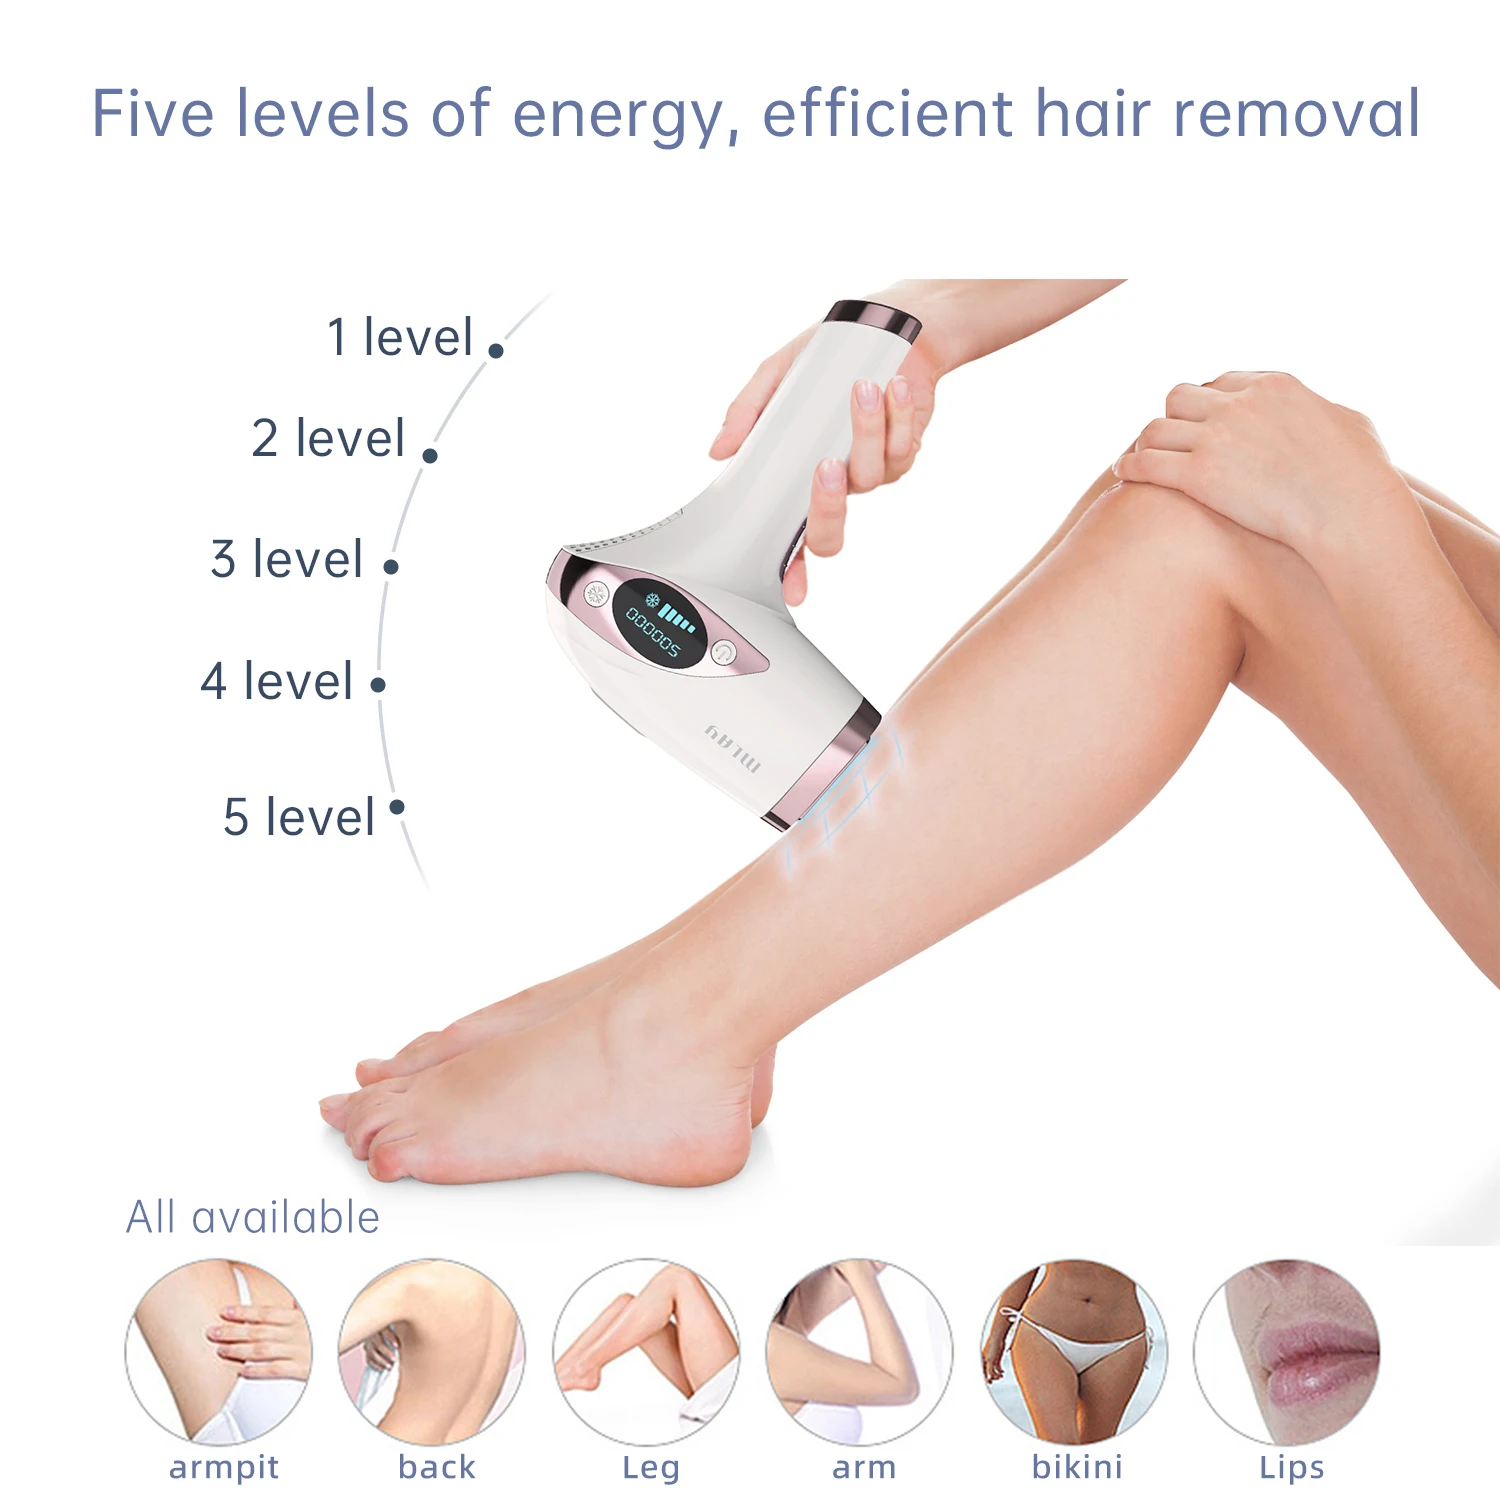 Mlay T4 Ice Cool Laser IPL Hair Removal Device for Home Use with UK US Plug Types